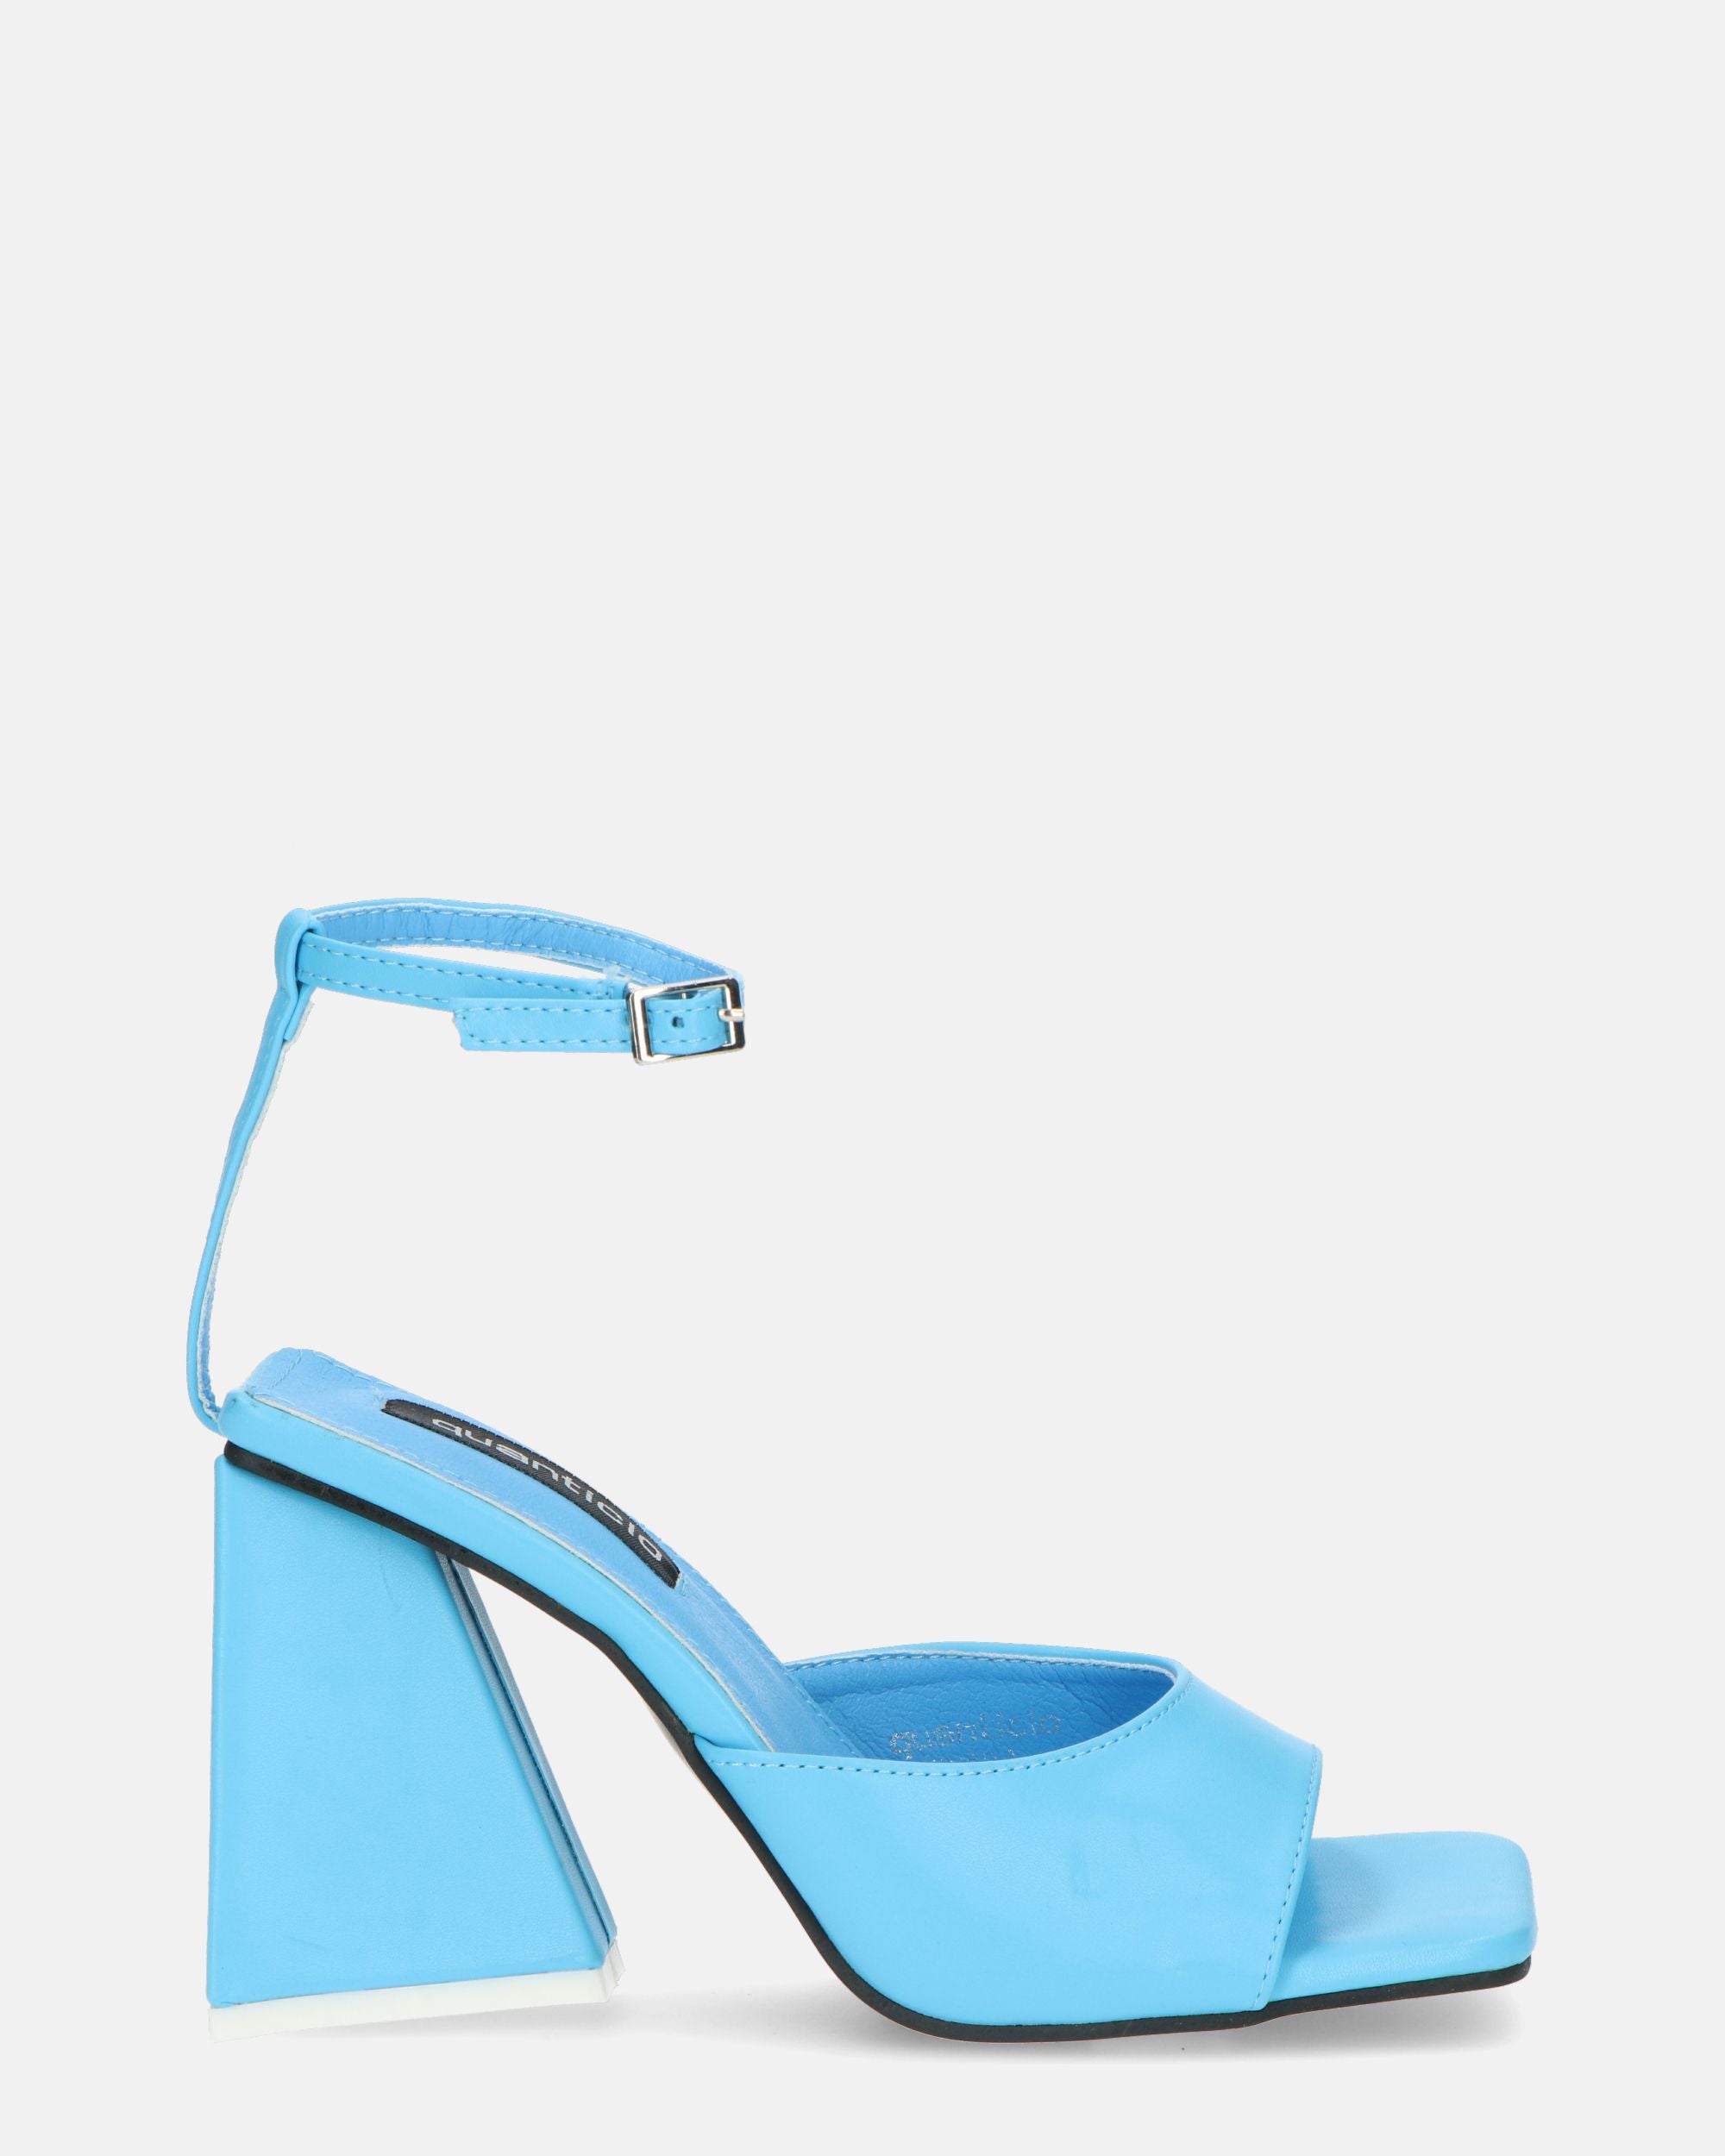 KUBRA - sandals with strap in light blue PU